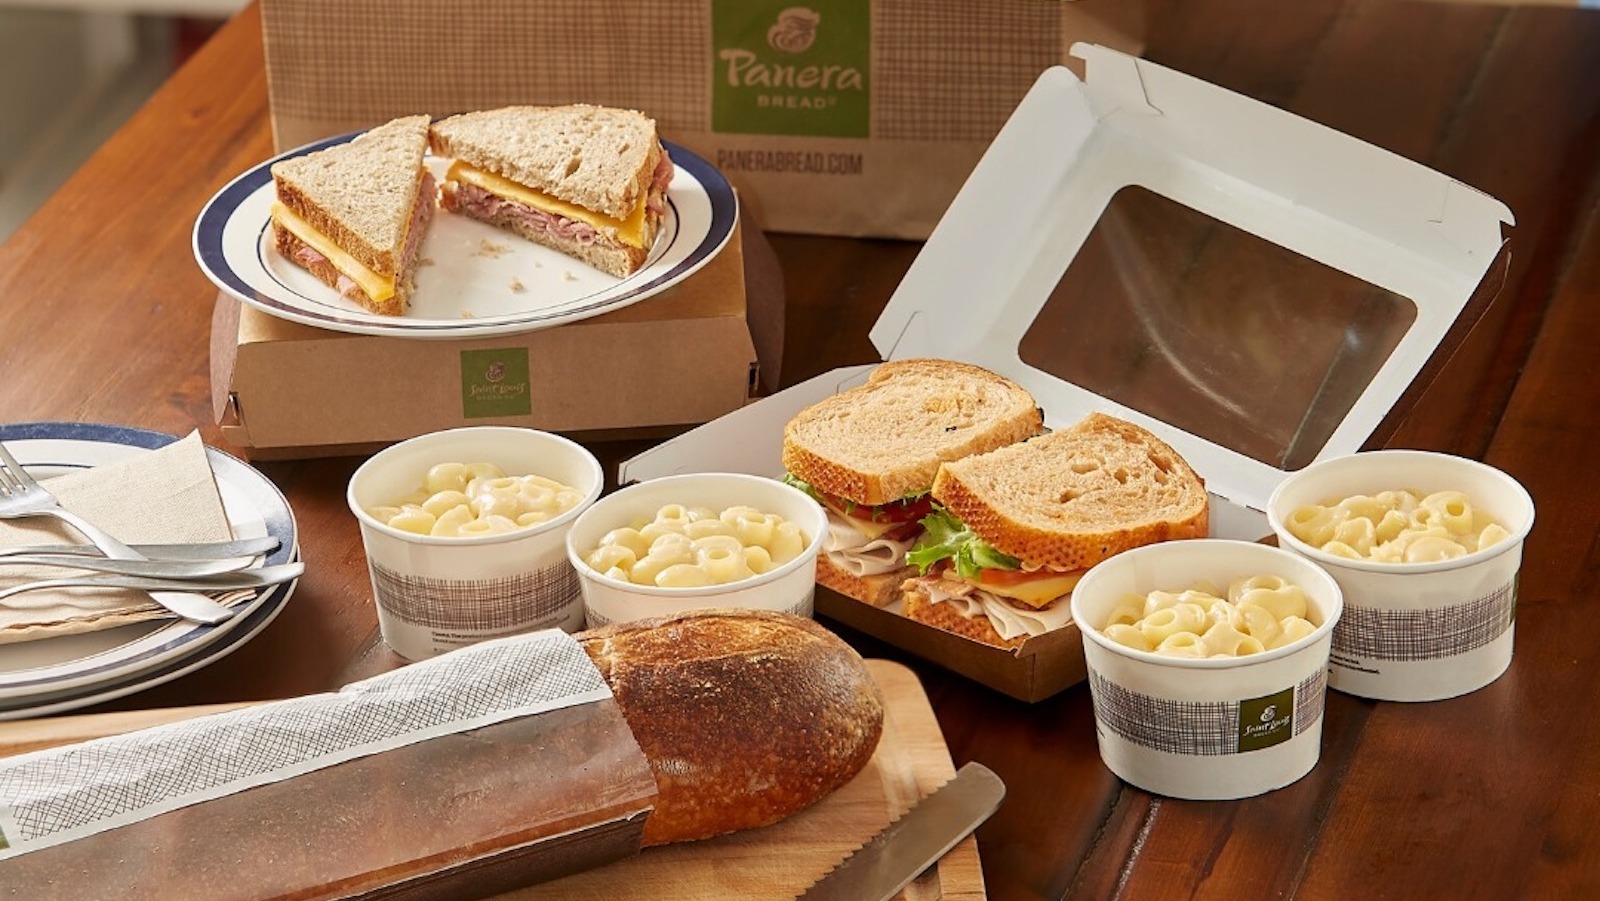 Nearly 22 Said This Was The Best Sandwich At Panera Bread